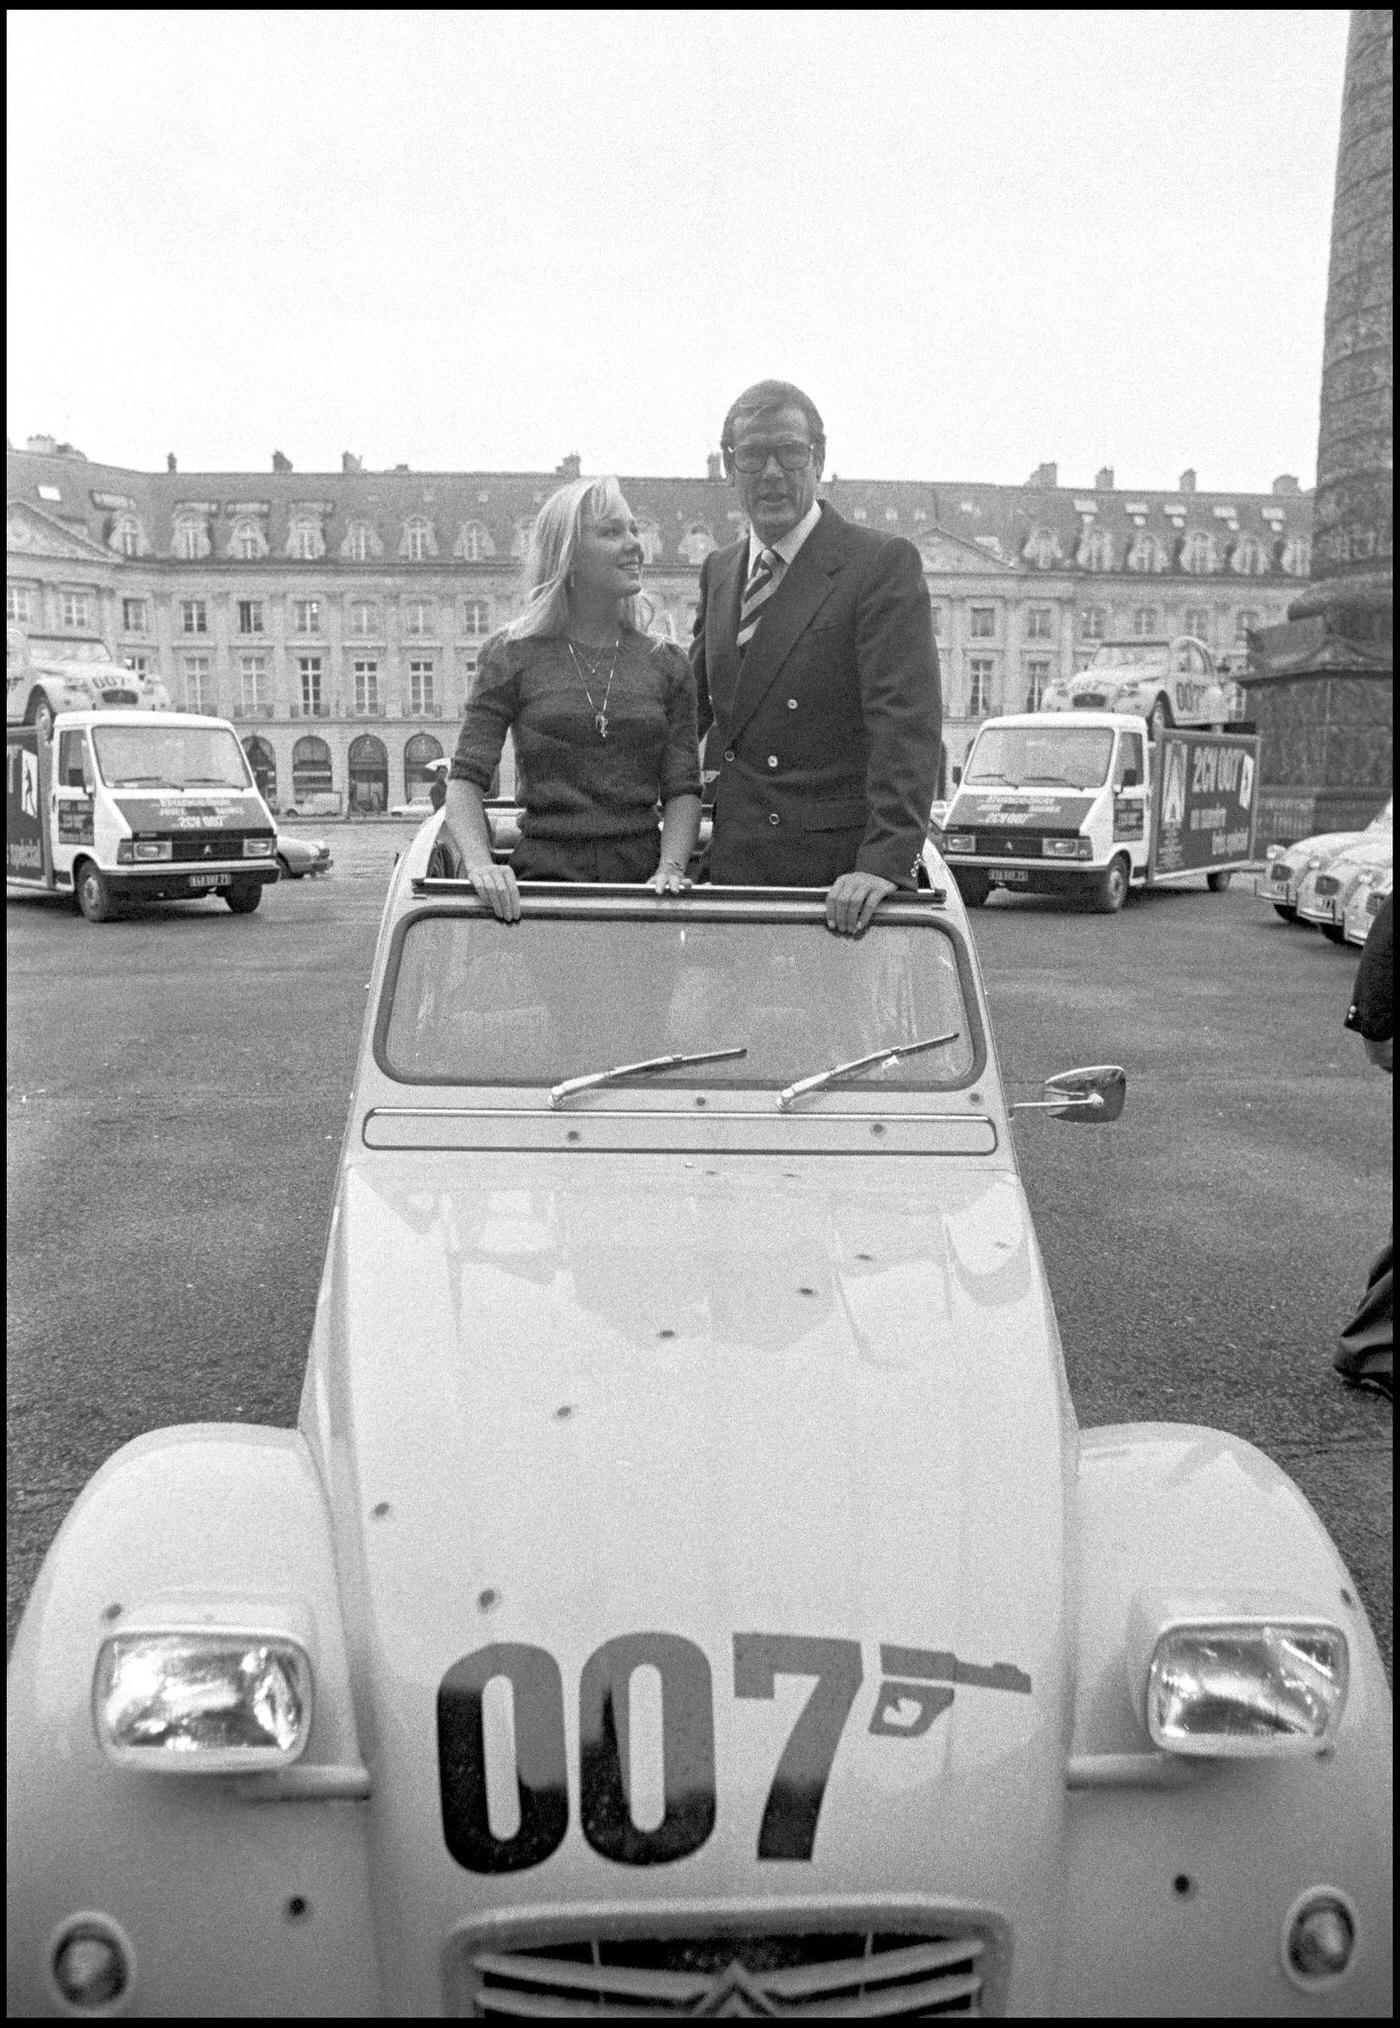 Roger Moore promoting "For Your Eyes Only" with a Citroen 2CV on Vendome Plaza in Paris.